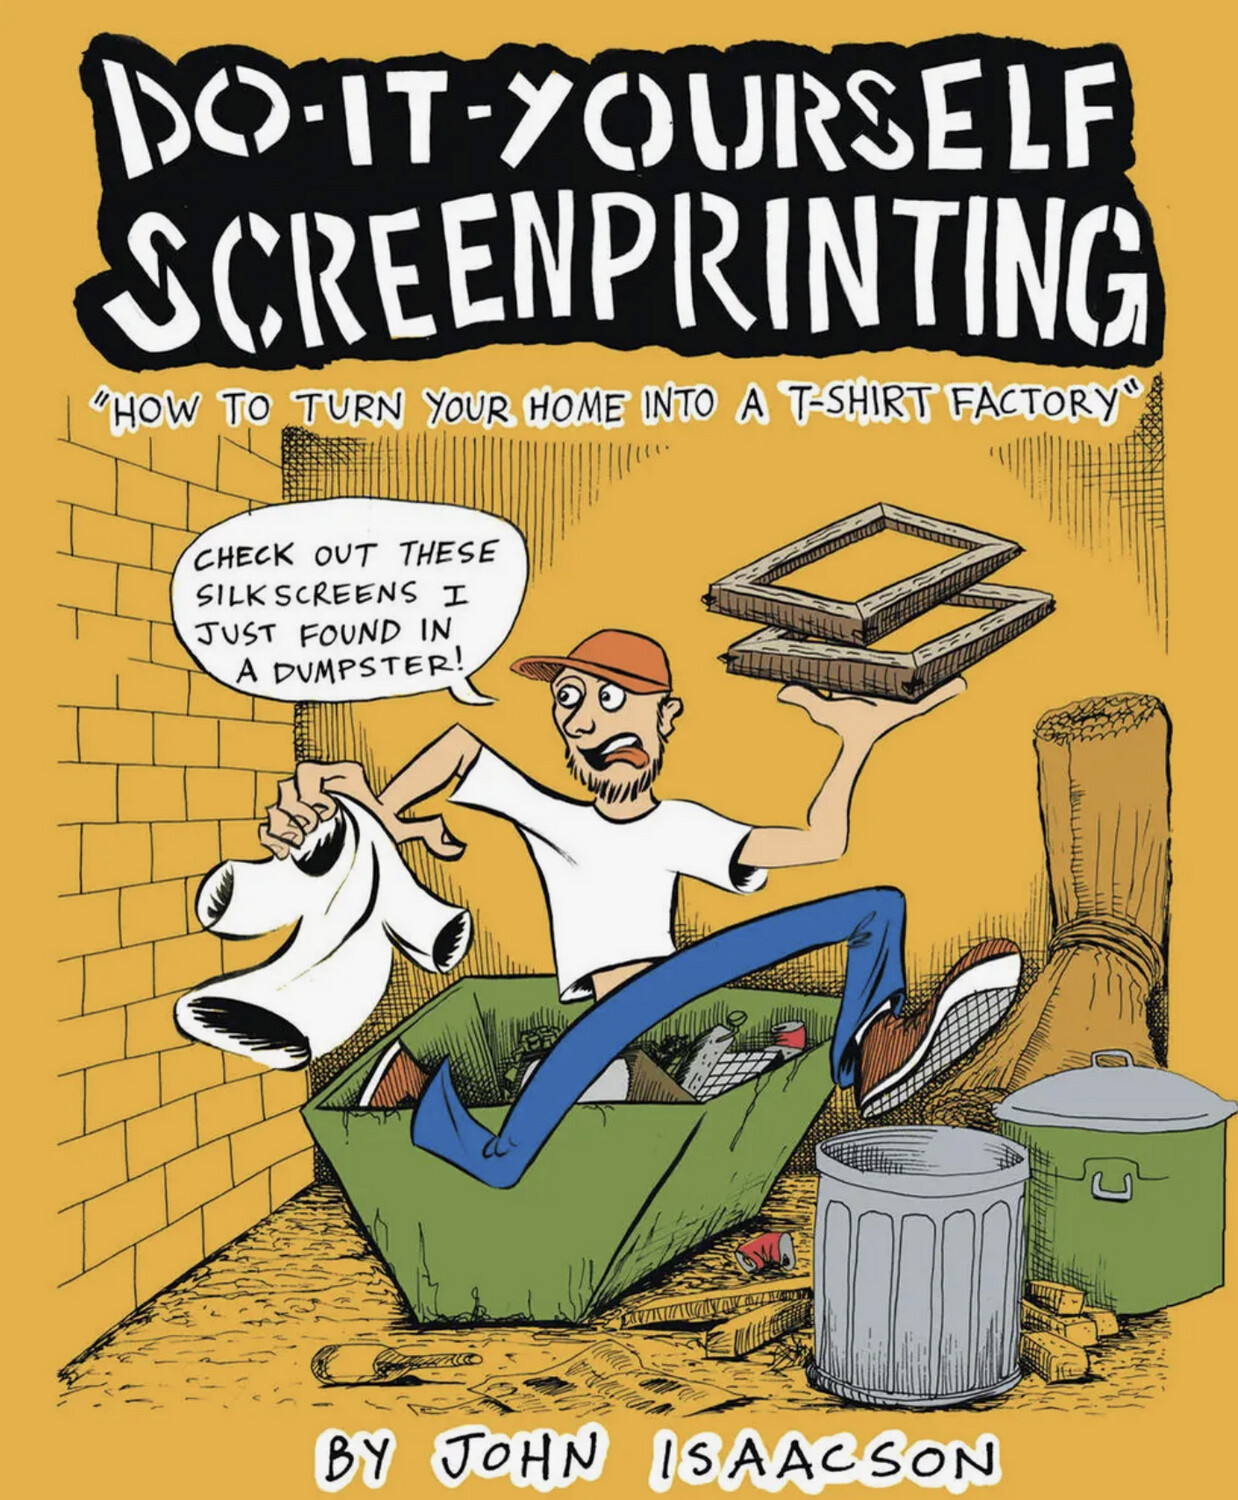 Do-It-Yourself Screenprinting - Book by John Isaacson